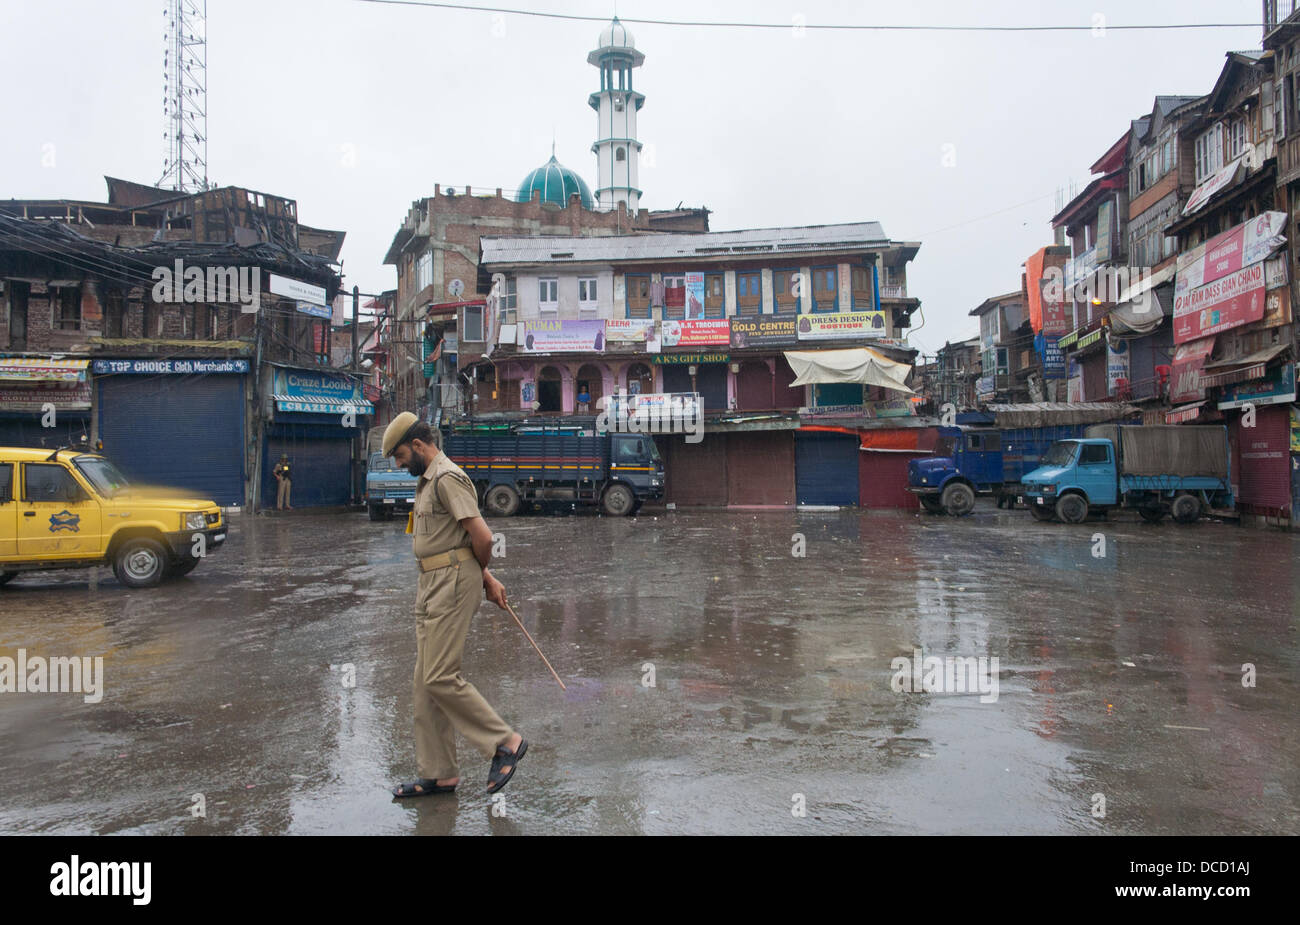 Srinagar, Indian Administered Kashmir 15th AUGUST 2013. An Indian policeman patrol a street during India's Independence Day in Srinagar, the summer capital city of Indian-administered Kashmir. Authorities had imposed restrictions even as a complete shutdown was observed in the disputed Himalyan region on the call of pro-independence groups as a mark of protest . (Sofi Suhail/ Alamy Live News) Stock Photo